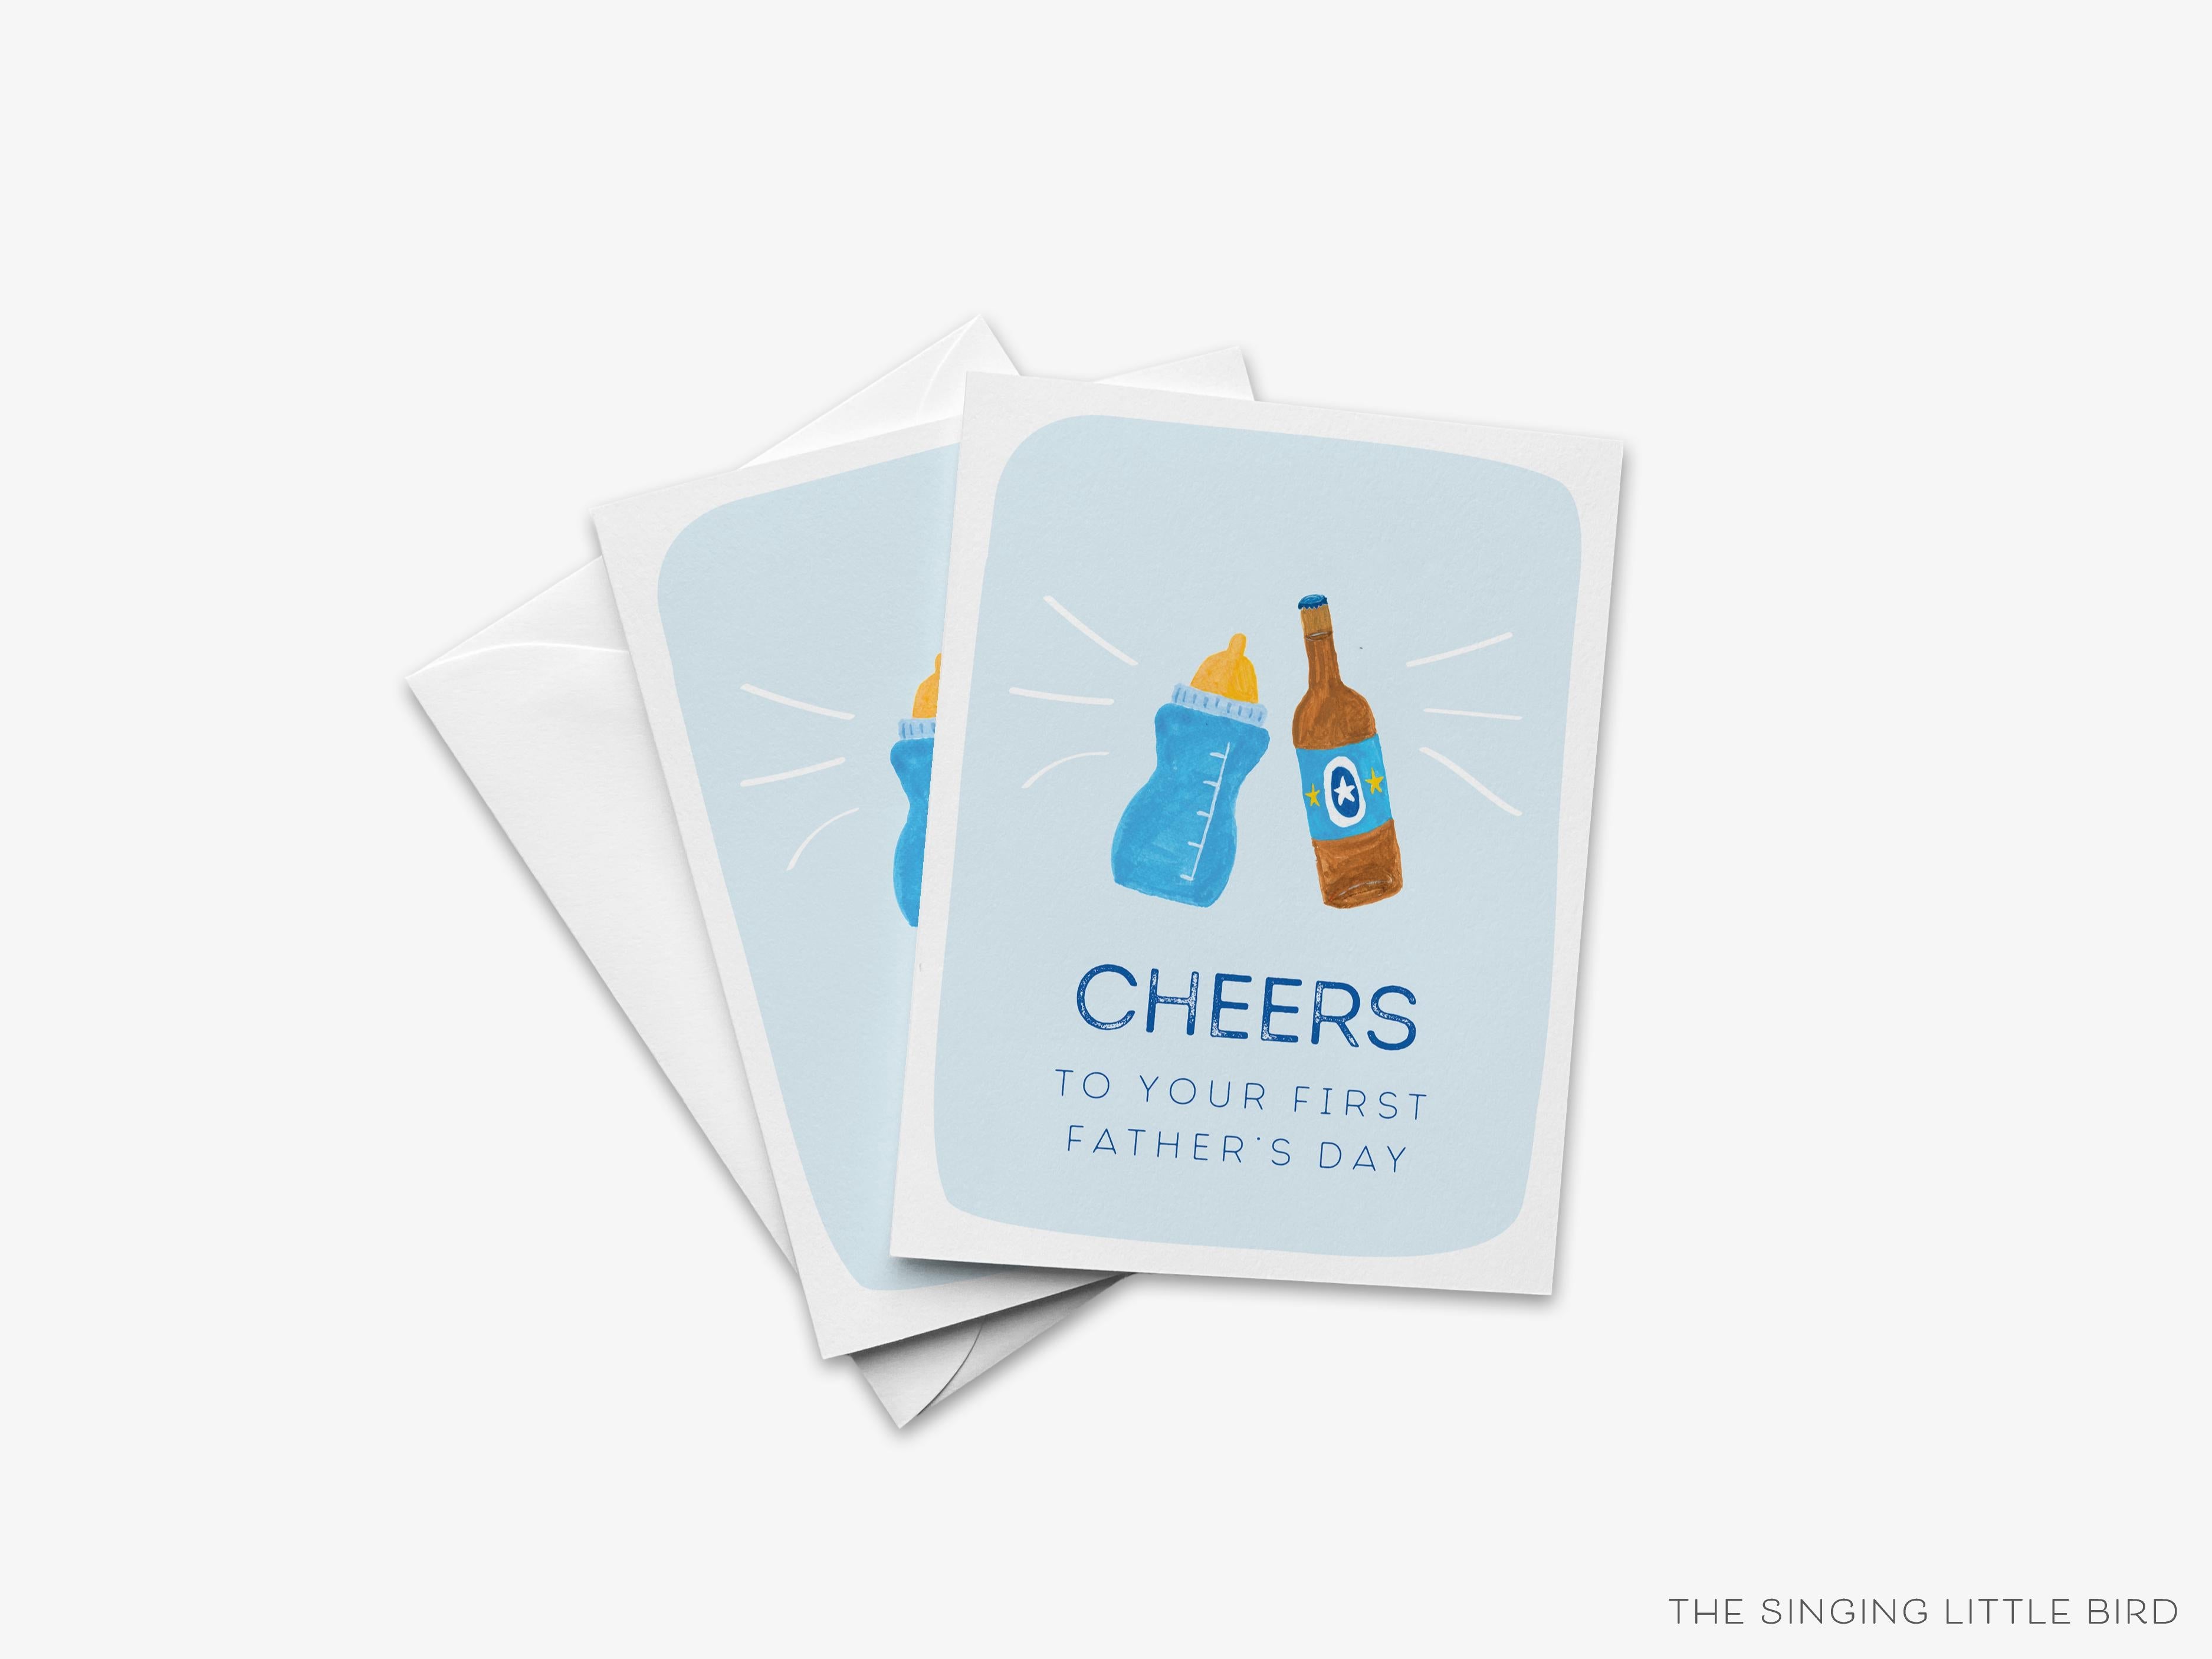 First Father's Day Card-These folded greeting cards are 4.25x5.5 and feature our hand-painted baby bottle and glass bottle, printed in the USA on 100lb textured stock. They come with a White envelope and make a great Father's Day card for the first time dad.-The Singing Little Bird